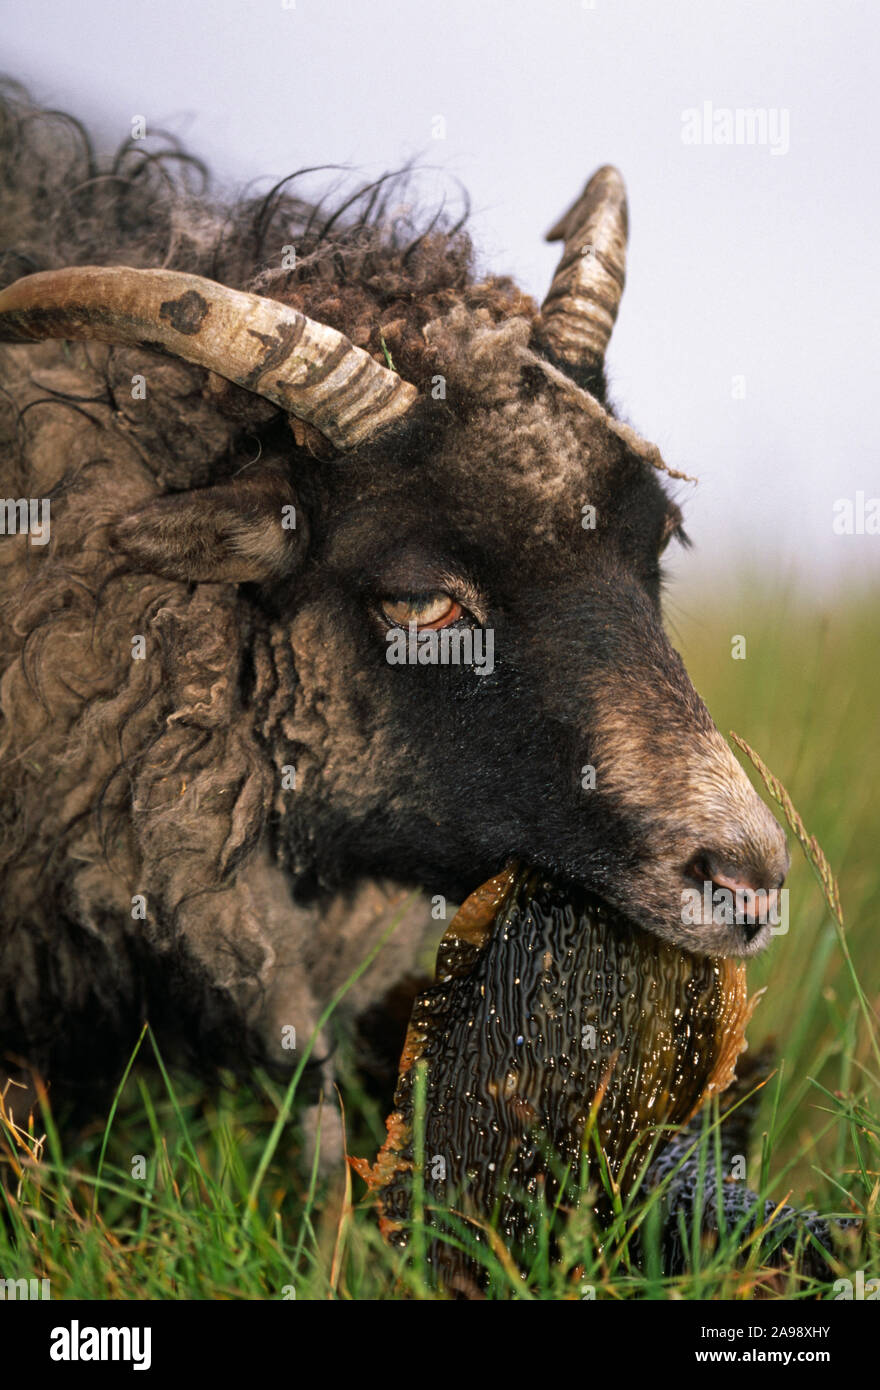 NORTH RONALDSAY RAM. Seaweed-eating domesticated sheep breed . Orkney Isles. Scotland. Grazing revealed seaweed between high and low water tidal flows Stock Photo